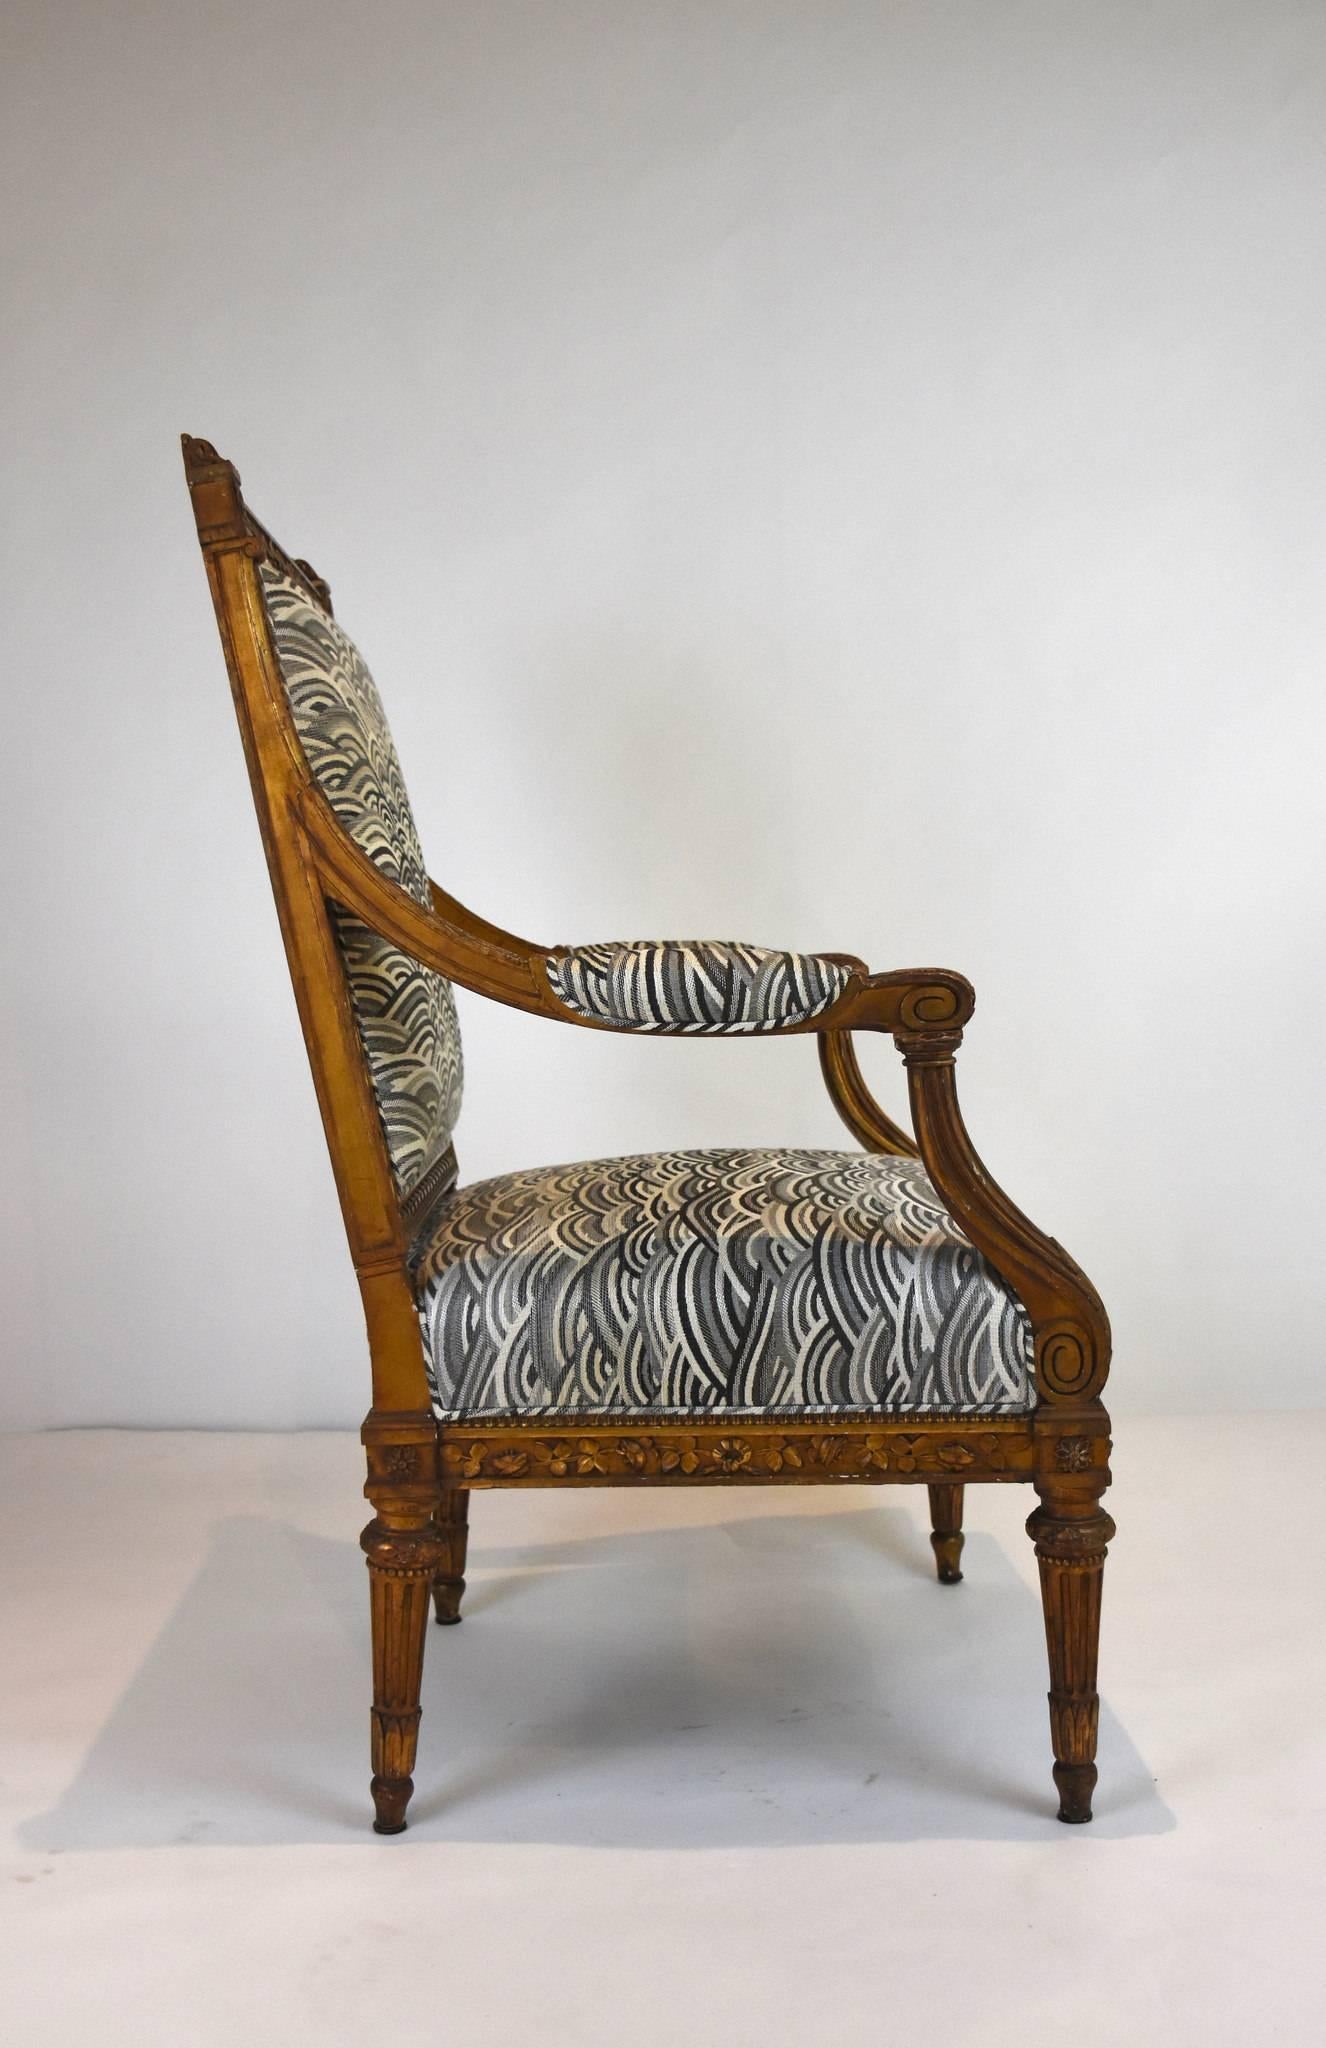 A 19th century Louis XVI style giltwood fauteuil, newly upholstered with a black, white, and gray organic medium weight woven fabric.